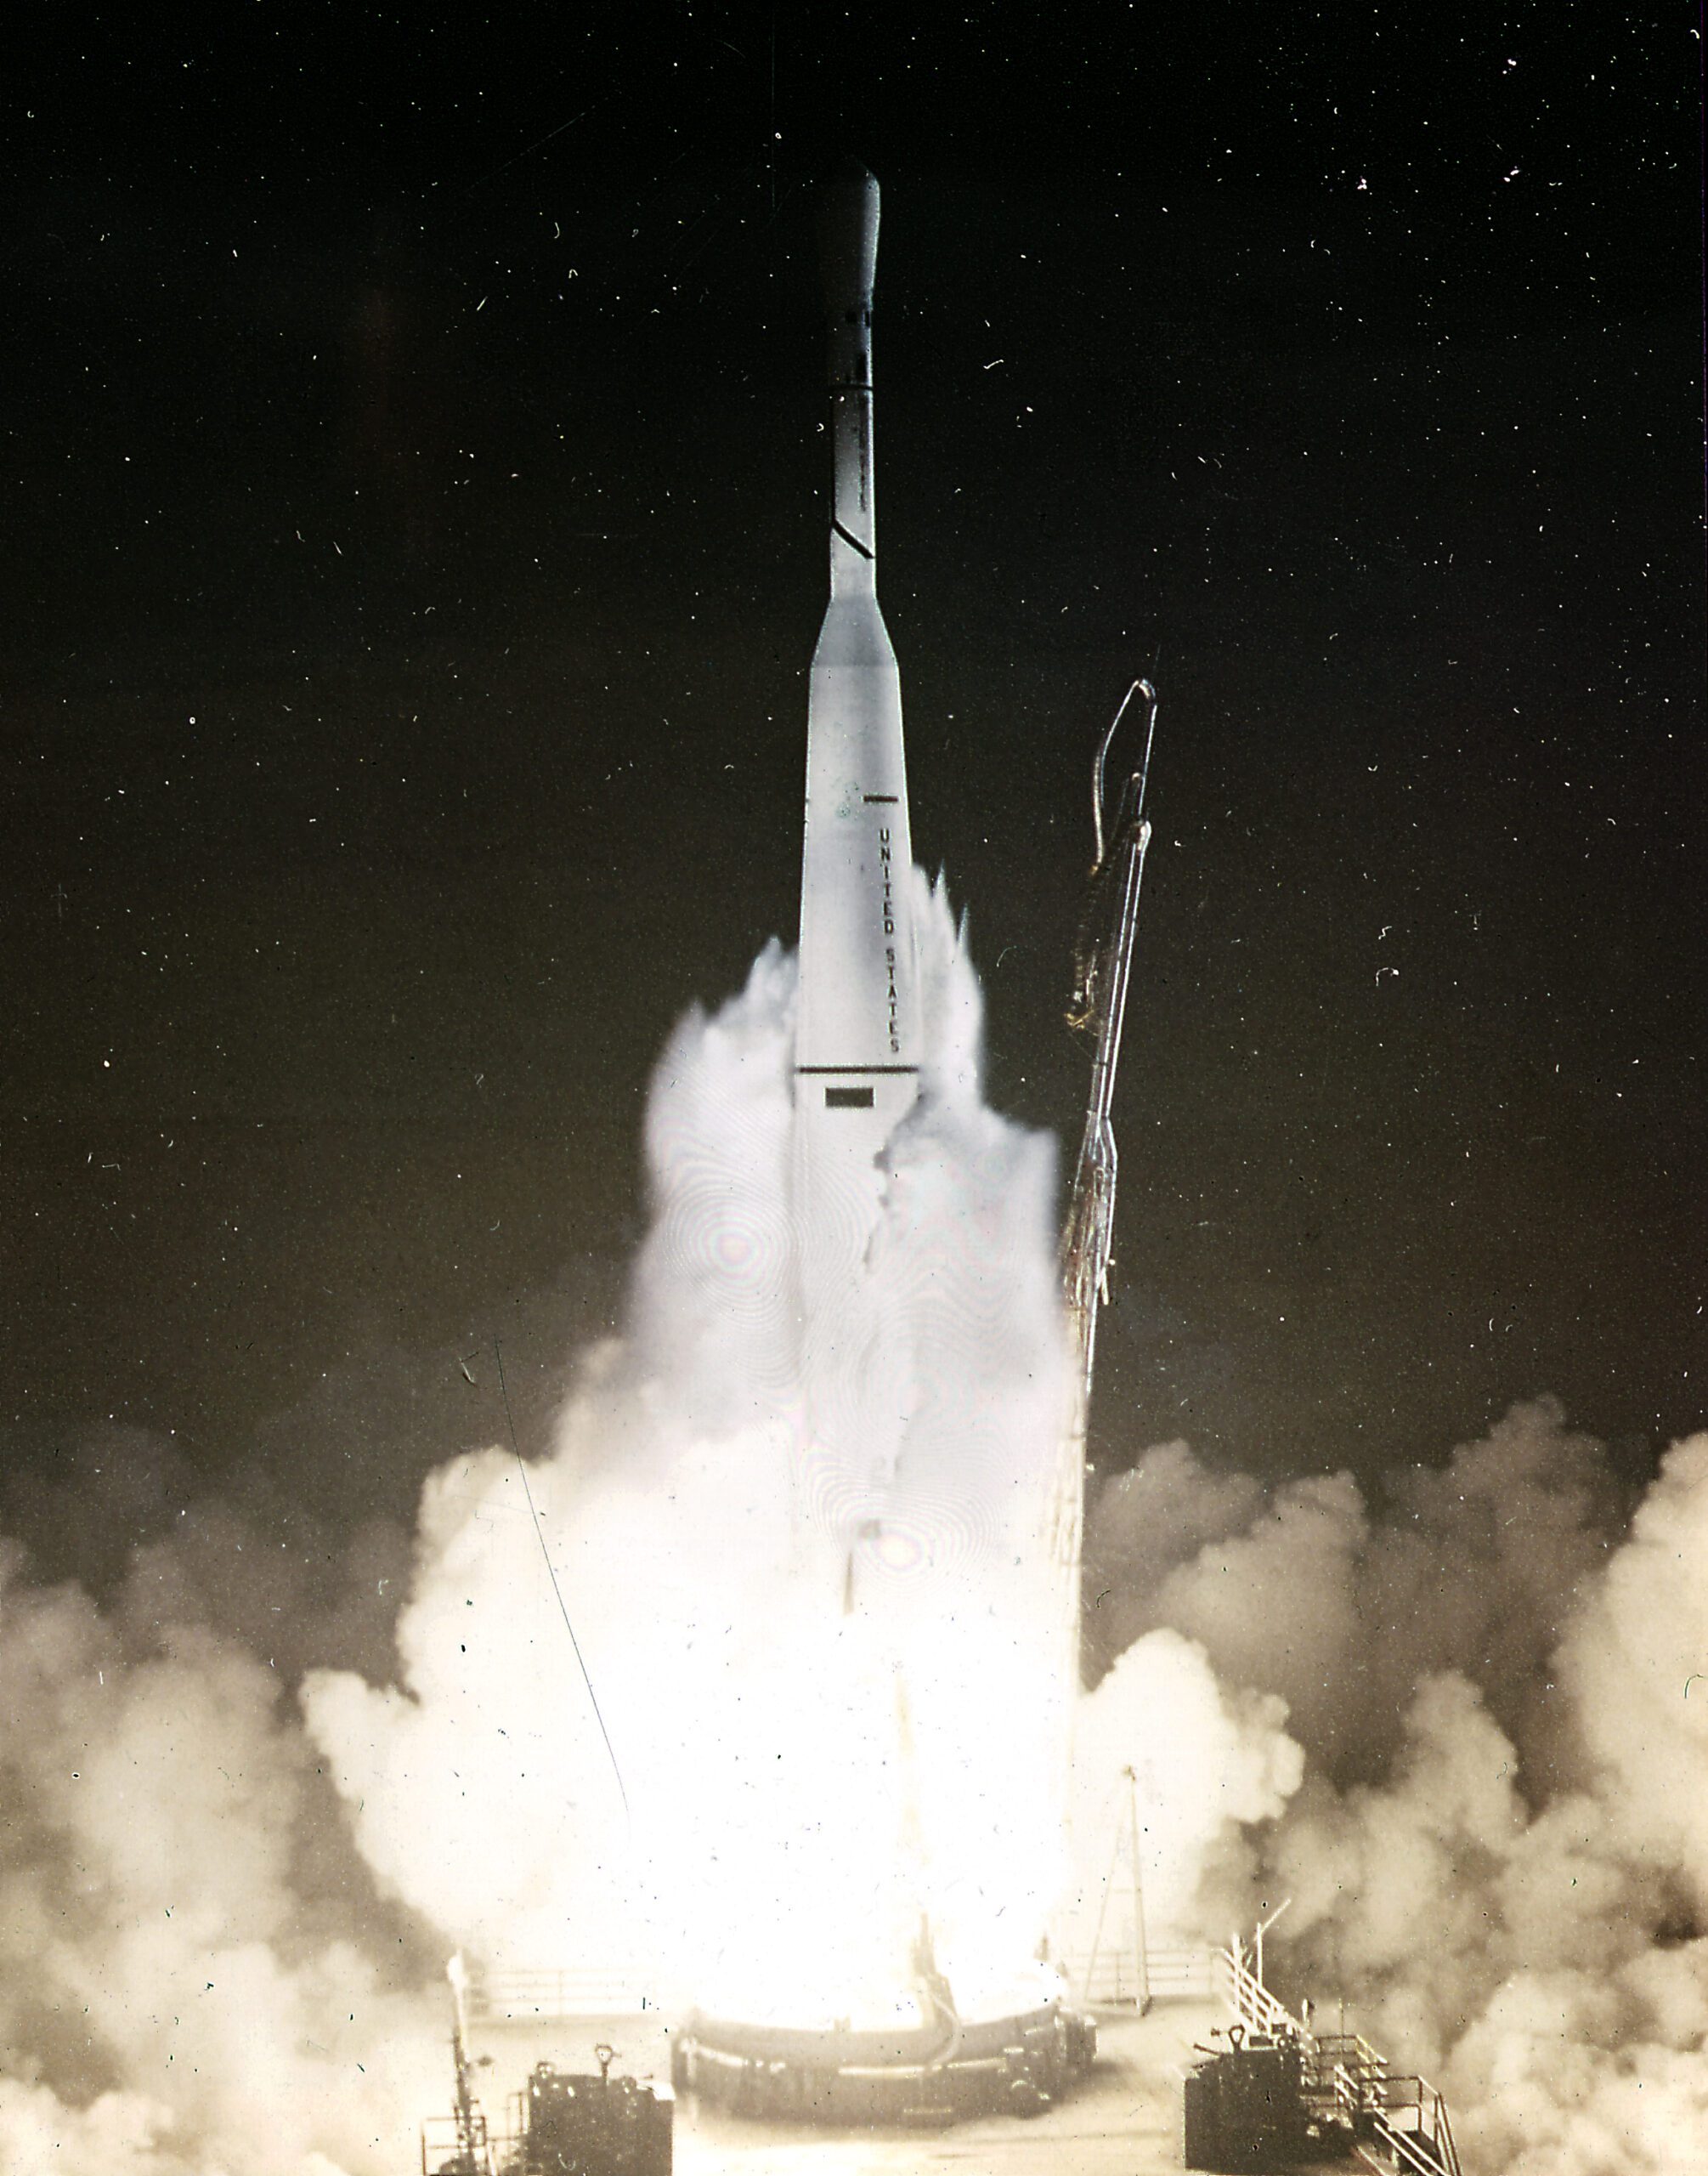 NASA Image of TIROS being launched